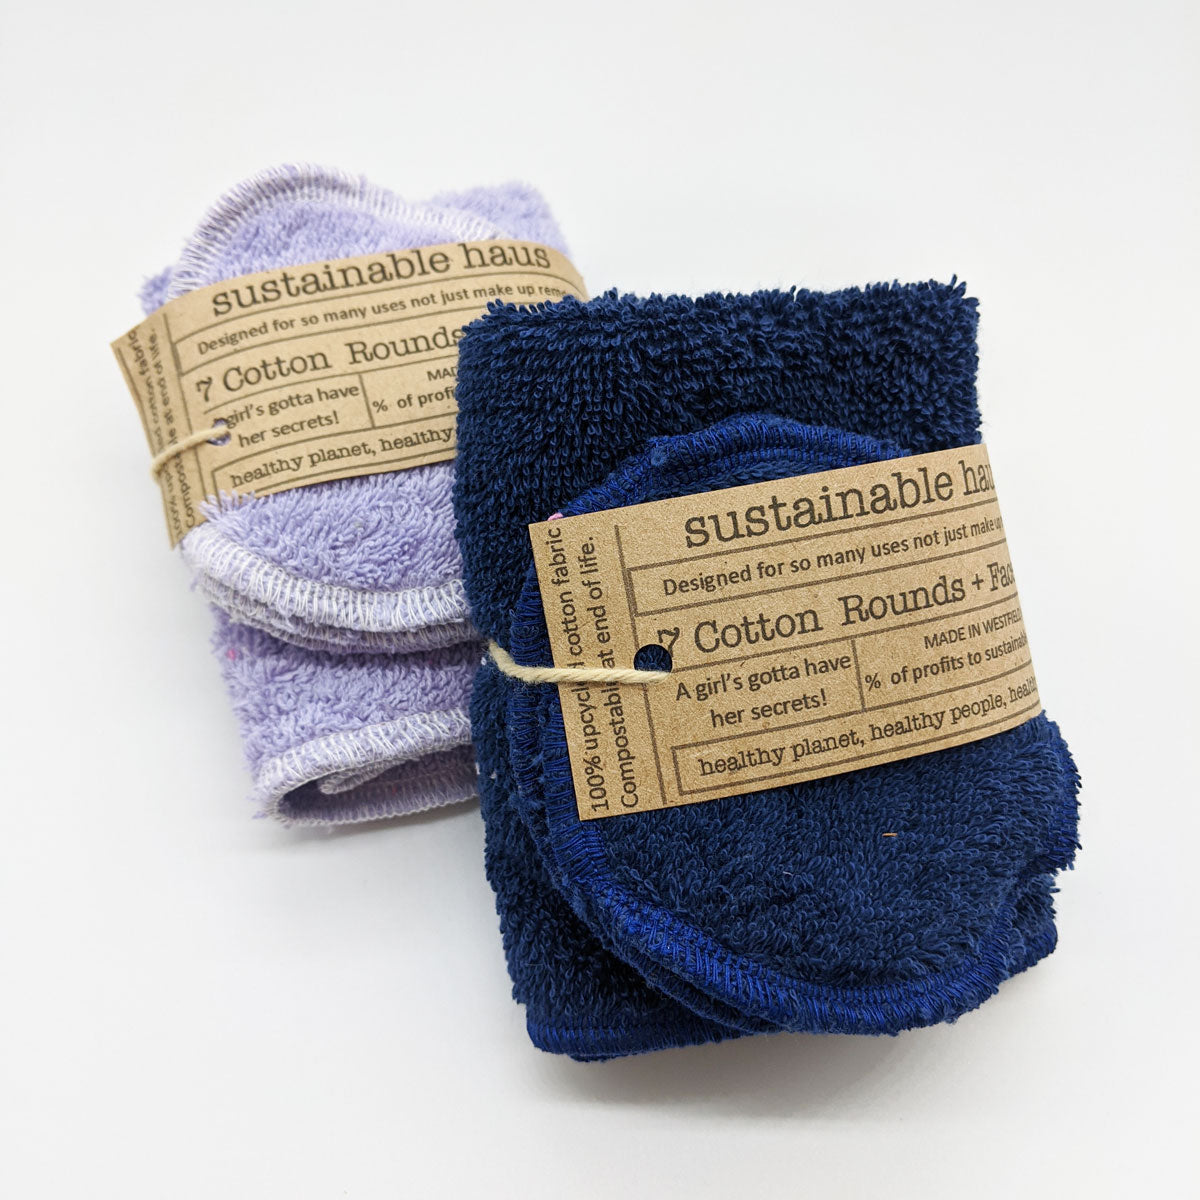 https://hyssopbeautyapothecary.com/cdn/shop/products/Product-sustainable-haus-cotton-rounds-with-washcloth.jpg?v=1595533576